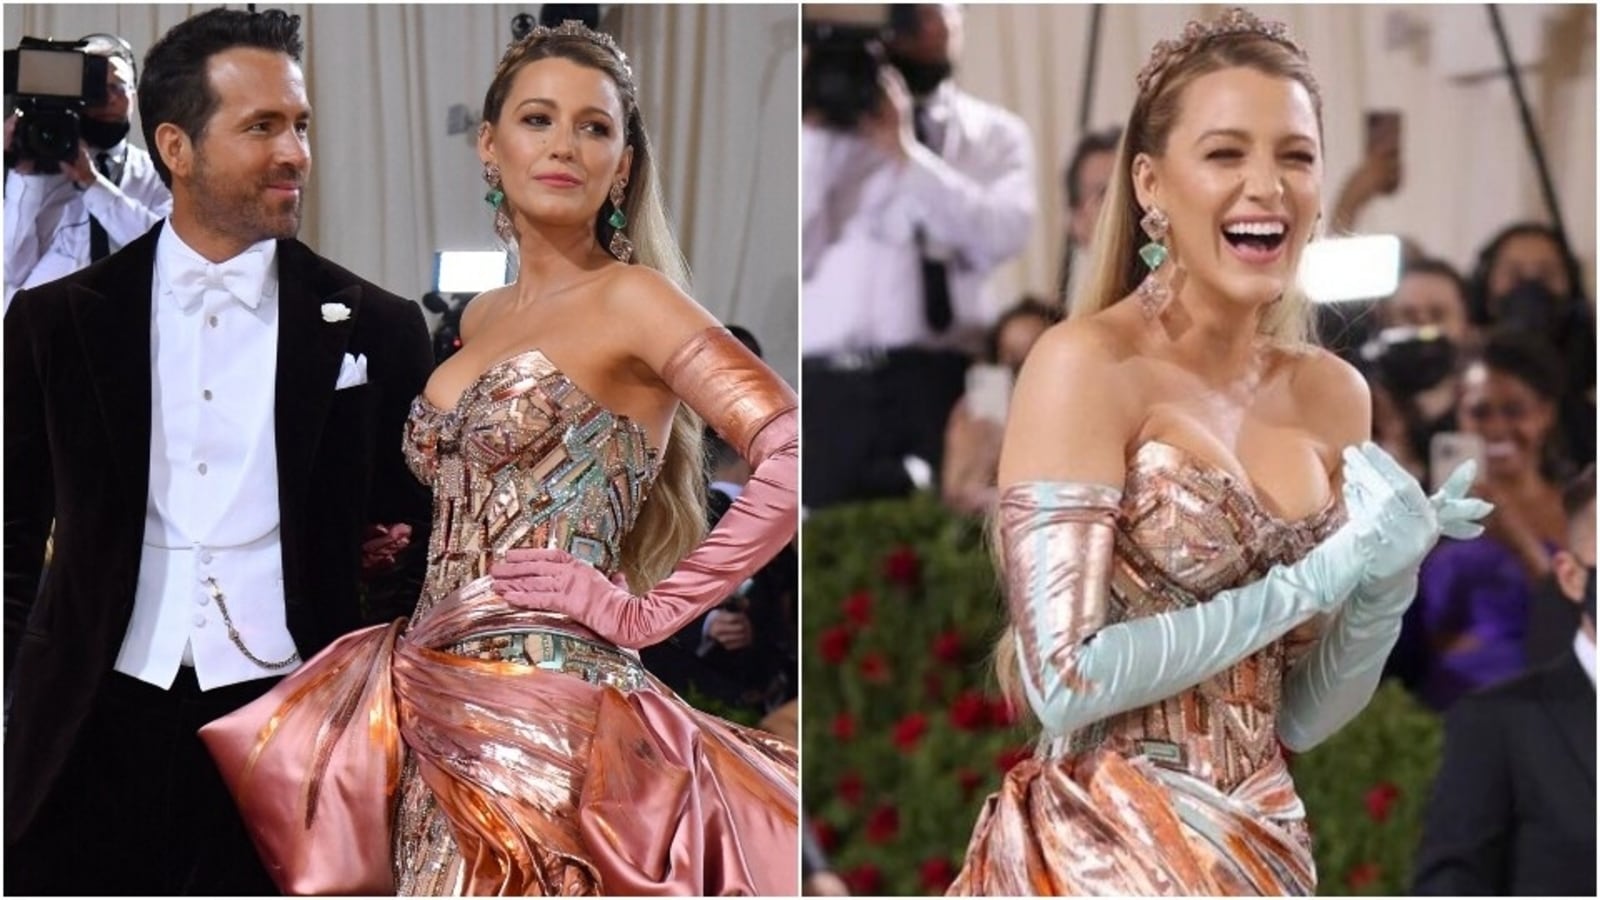 Blake Lively's Atelier Versace Gown Brings New York's